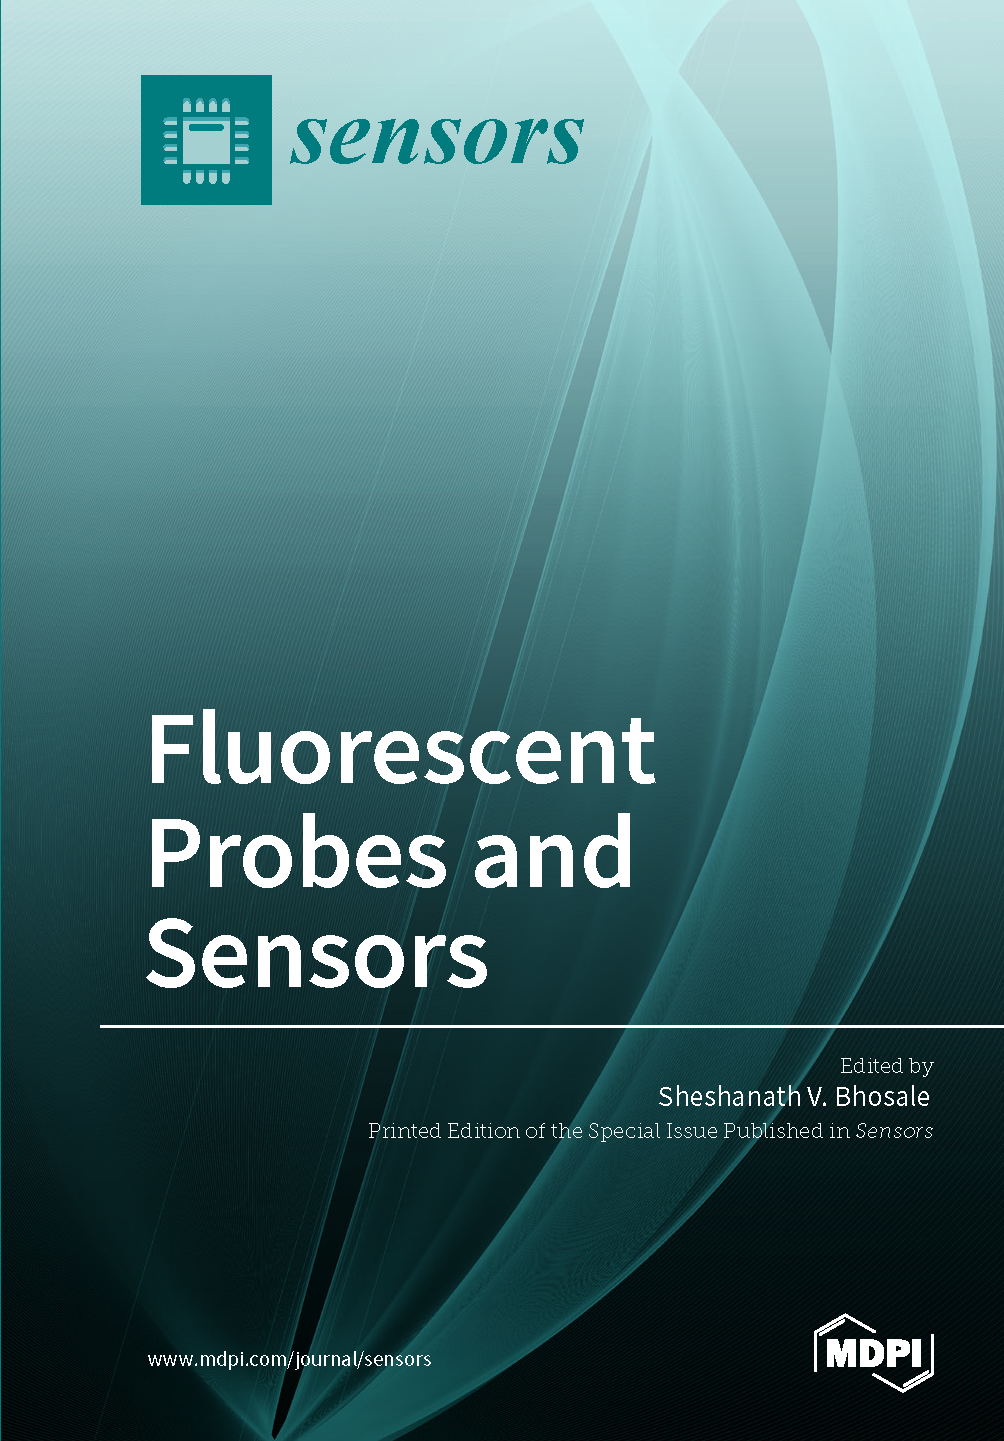 Fluorescent Probes and Sensors